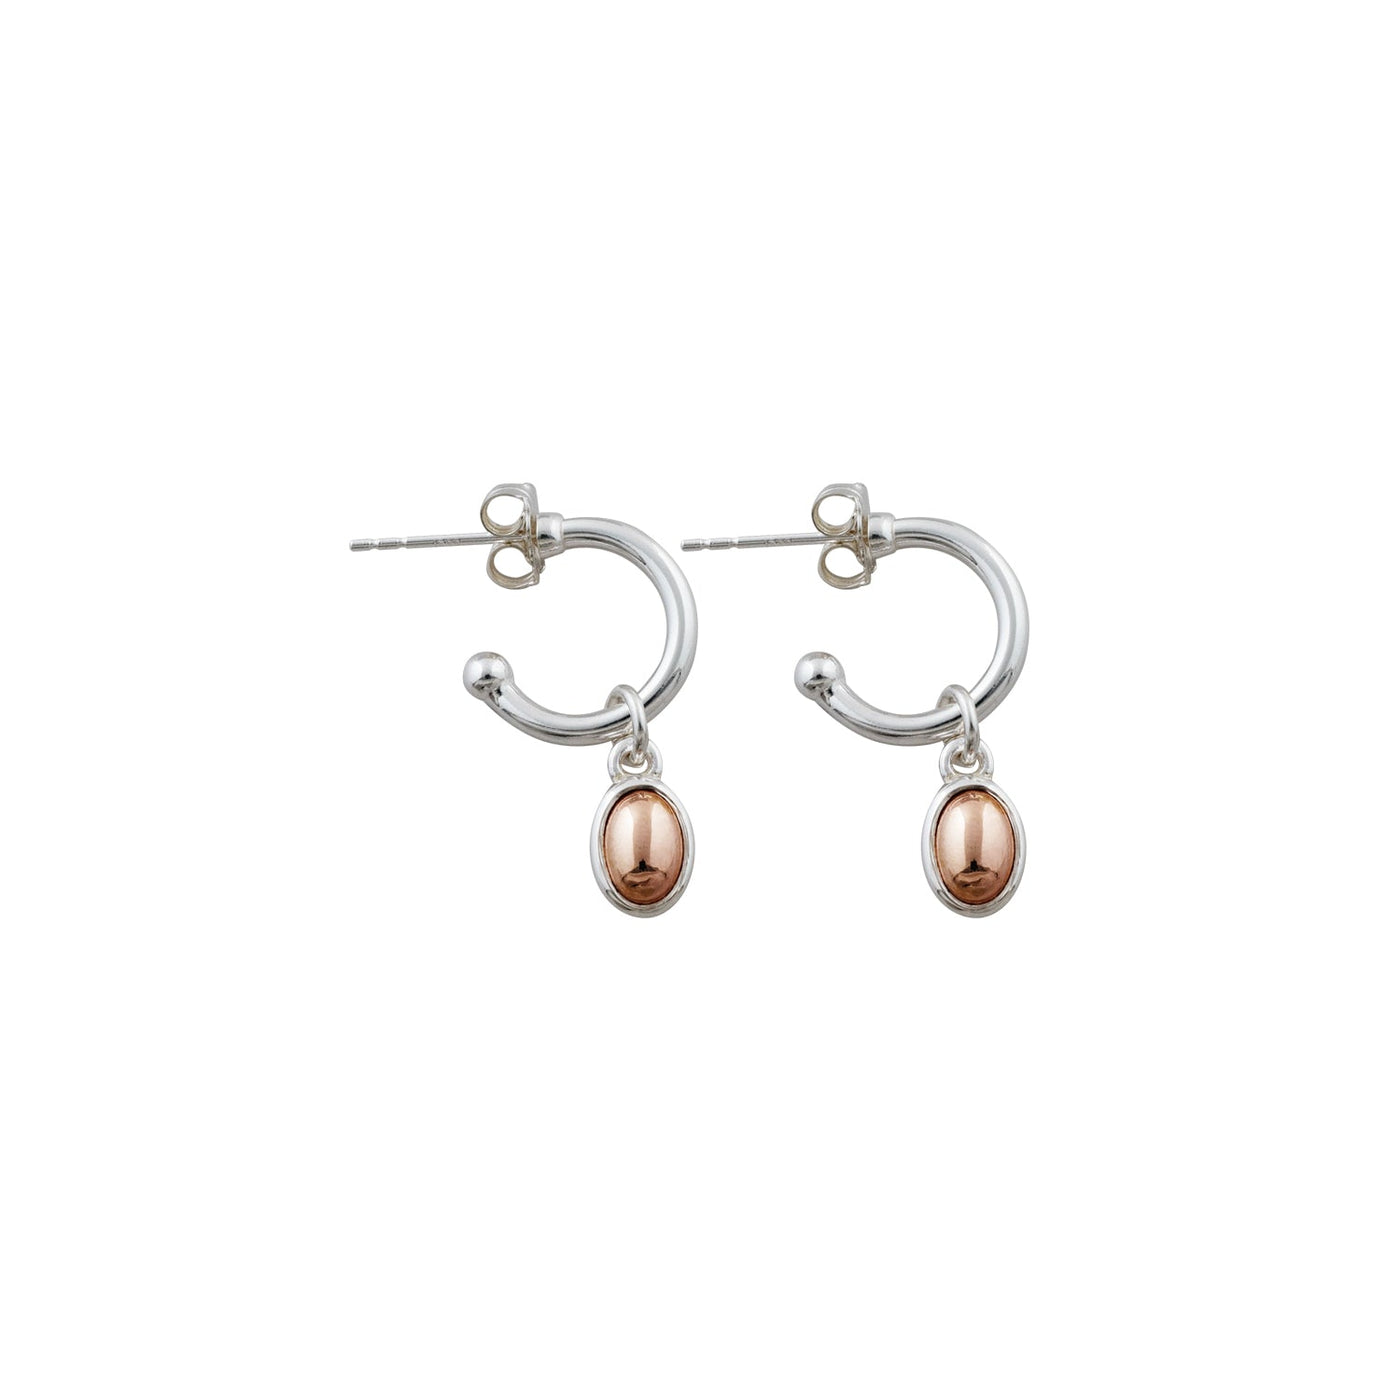 Von Treskow Open hoop studs with small rose gold-filled pendants